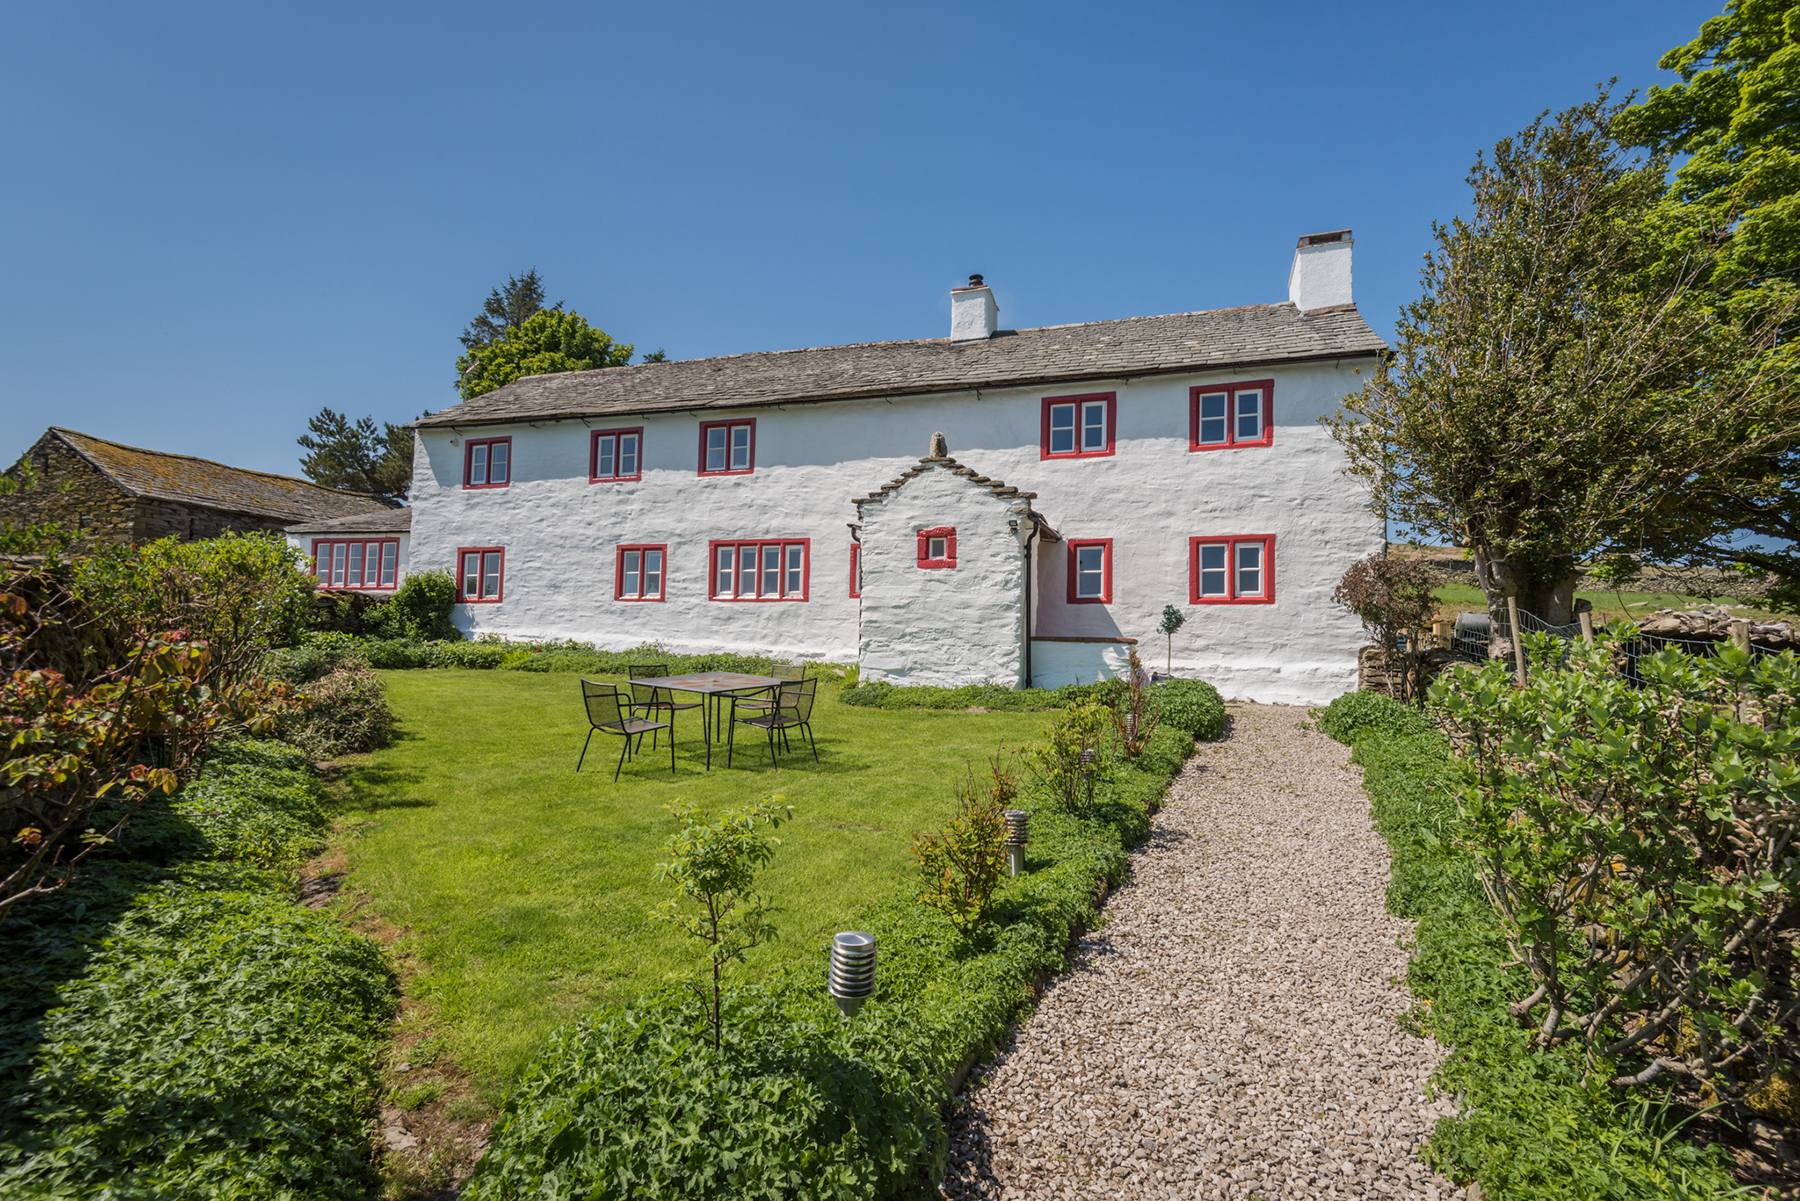 Lake District Holiday Cottages - Herdwick Cottages